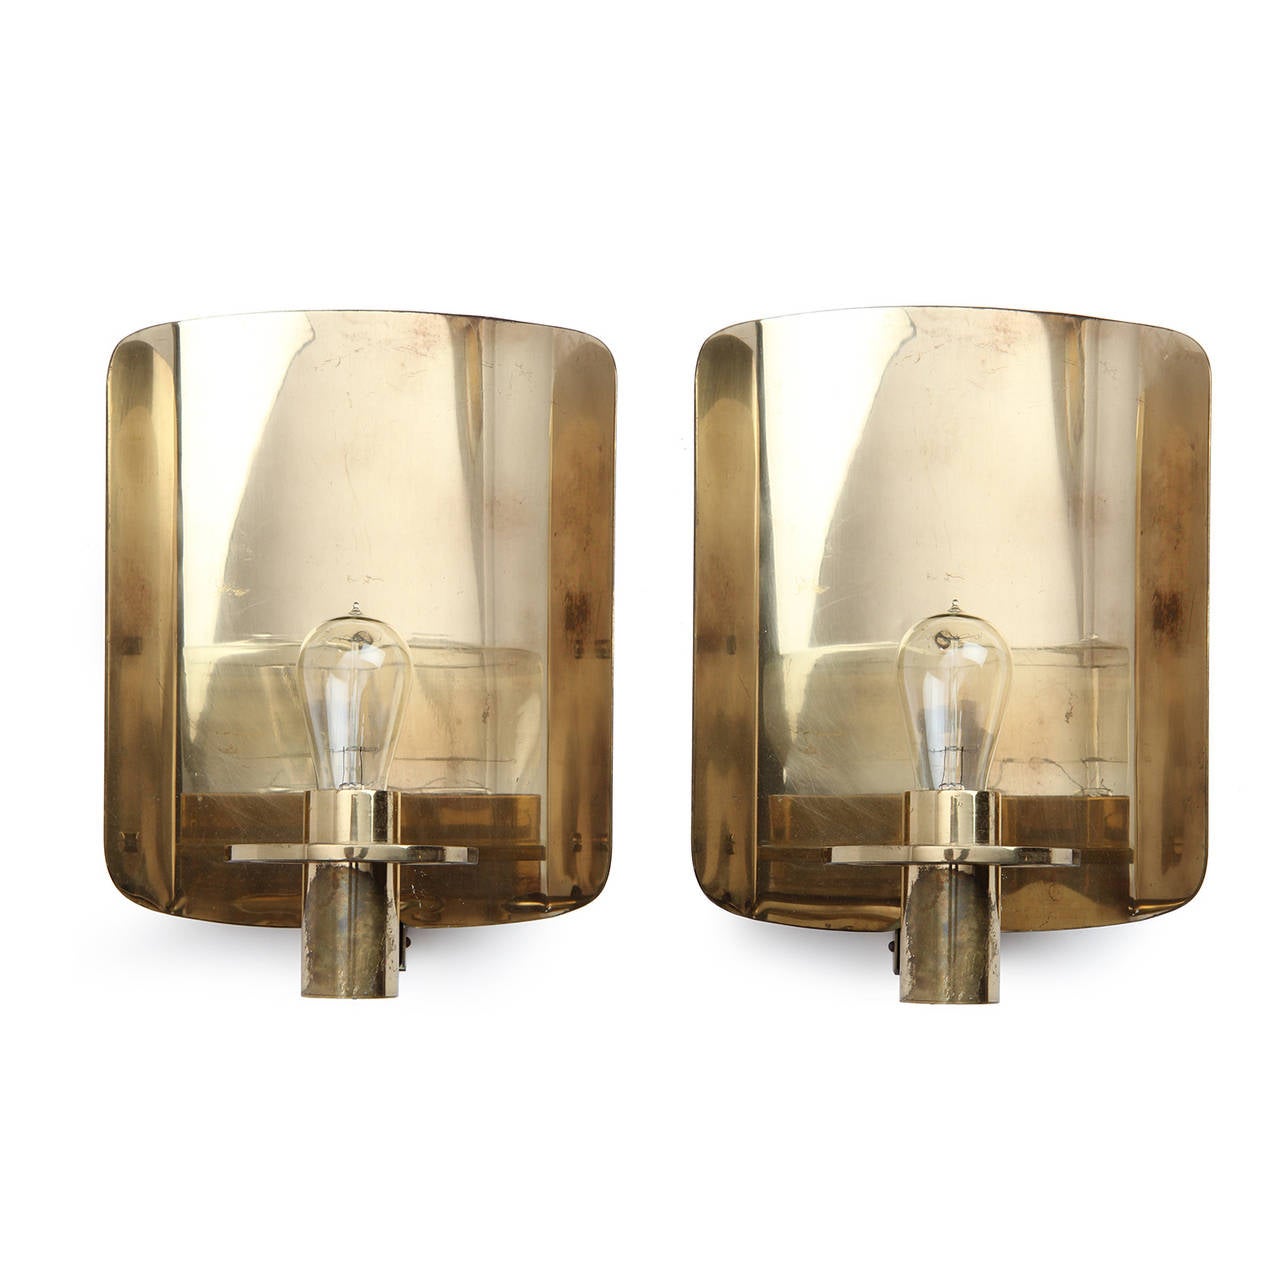 An elegant and uncommon pair of sconces in lacquered brass having a semicircular reflecting back panels and projecting sockets with Edison bulbs.